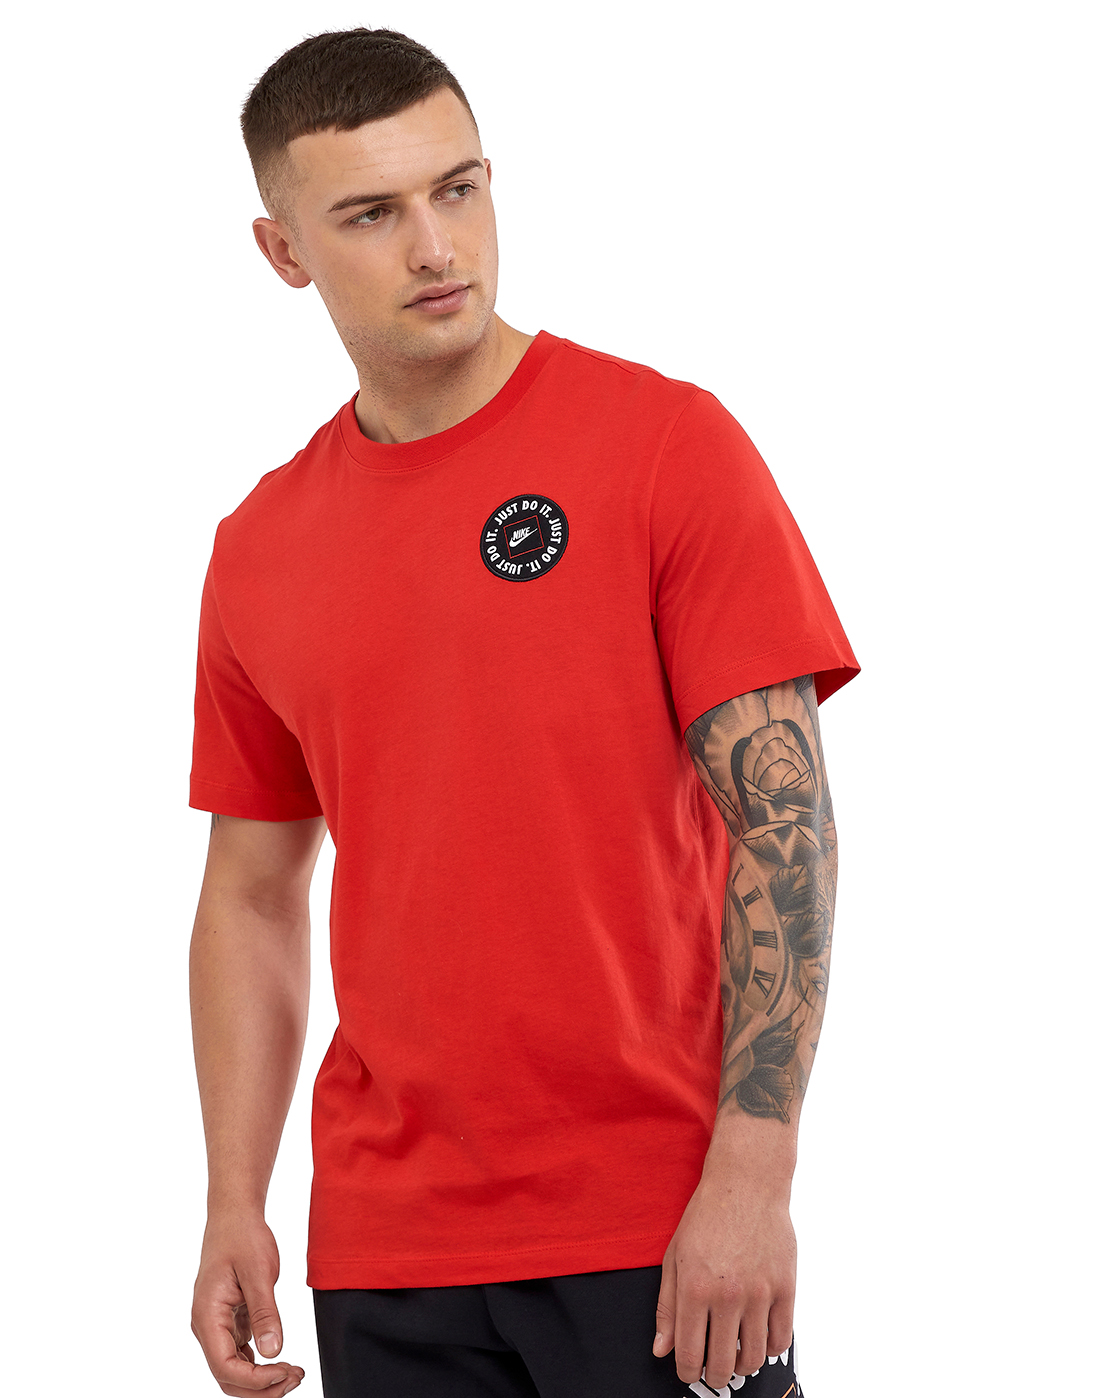 Nike Mens JDI T-Shirt - Red | Life Style Sports IE